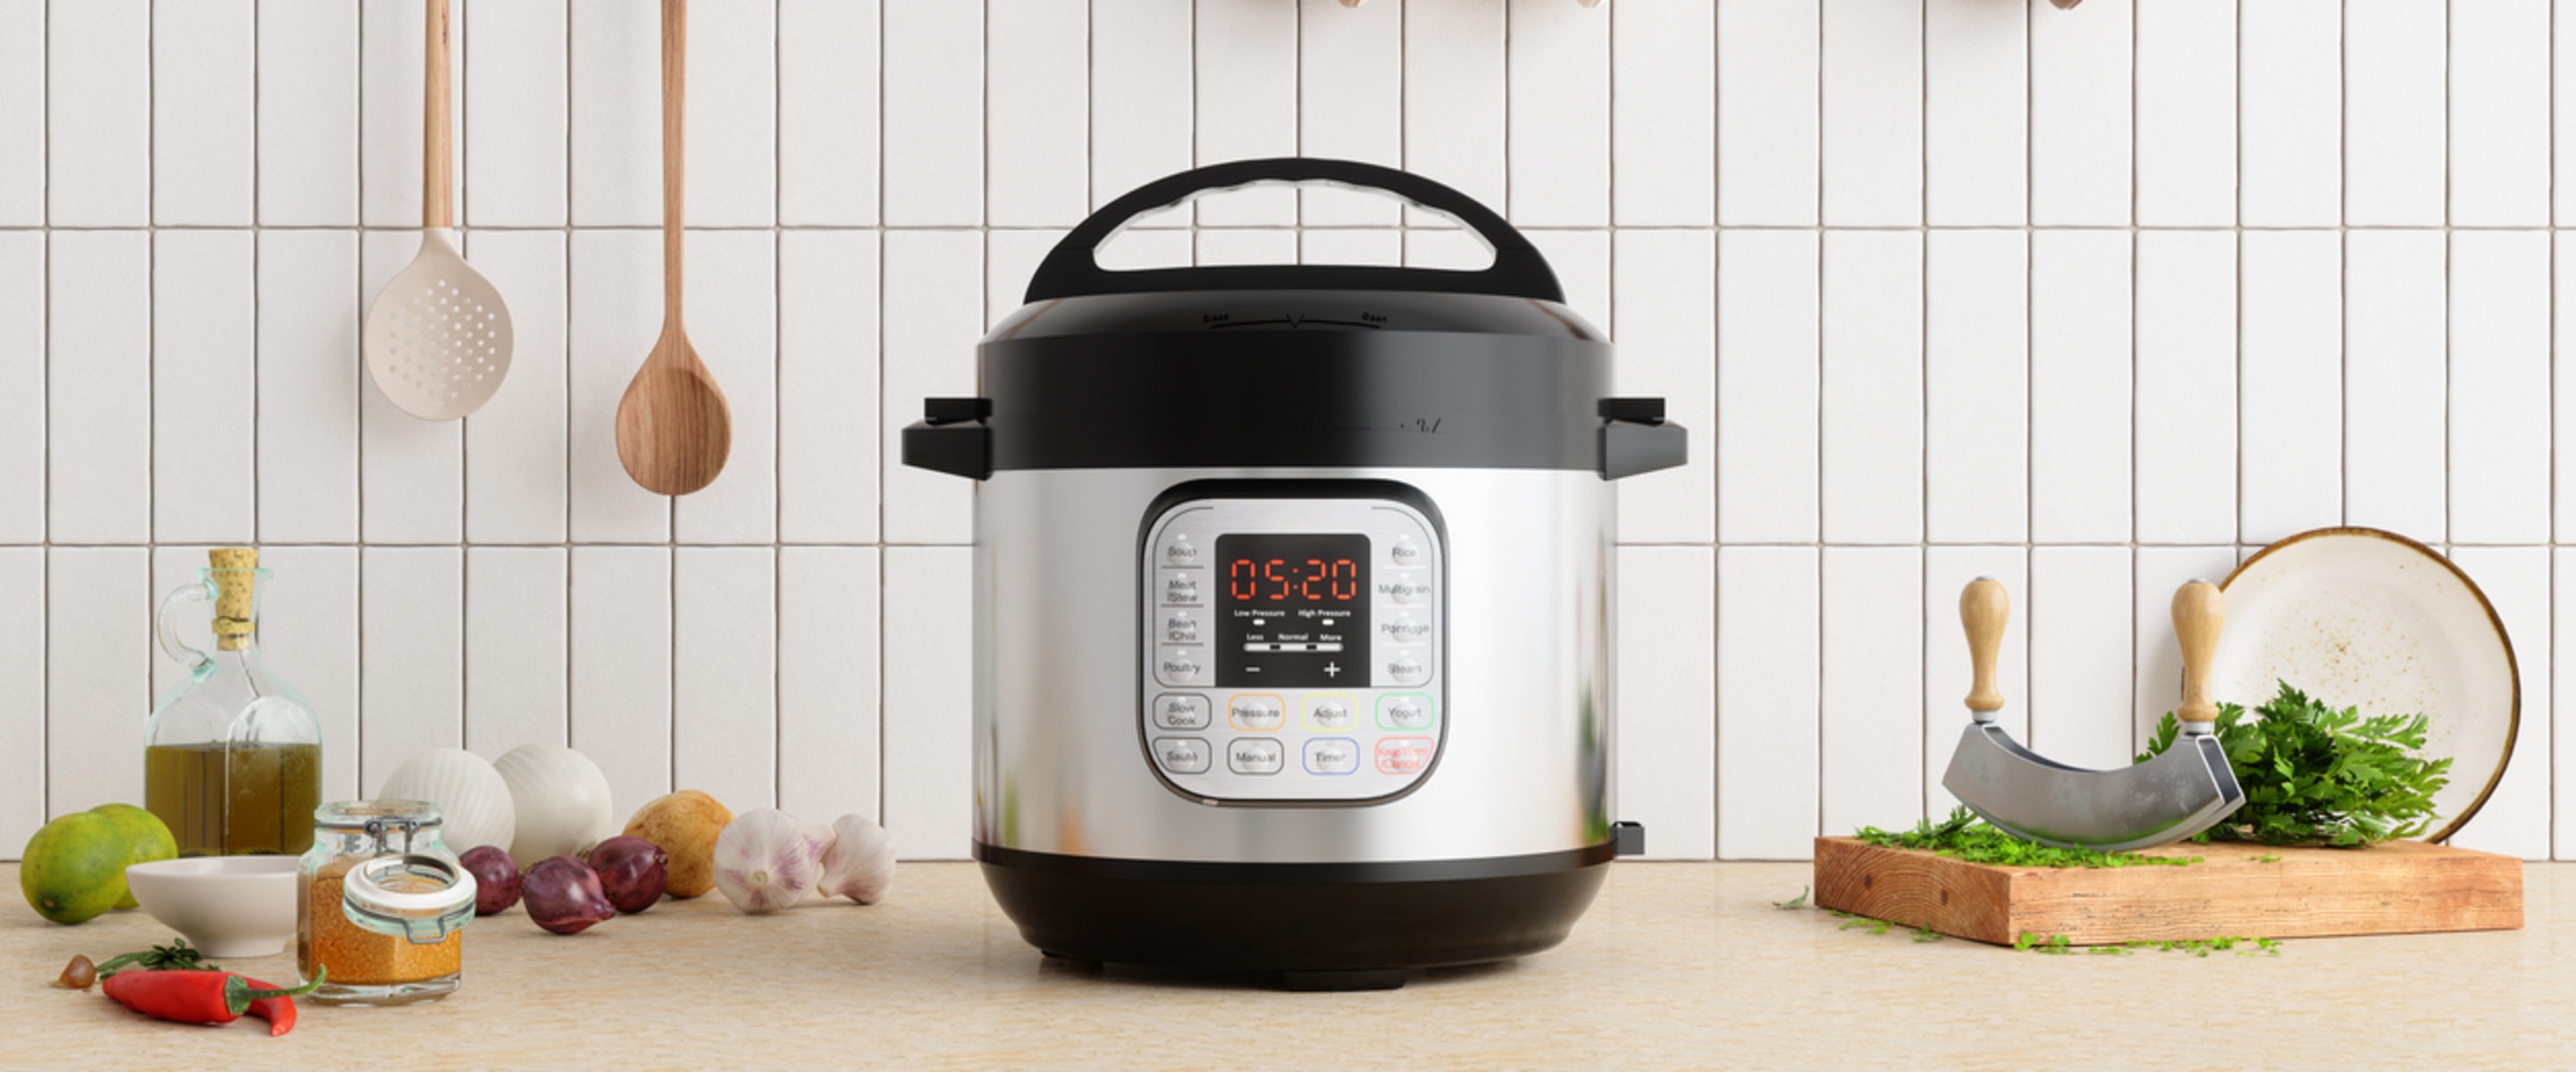 An Instant Pot is the Ultimate Kitchen Multitasker: How to Use It to Sauté, Pressure Cook, Slow Cook, Make Yogurt, and More